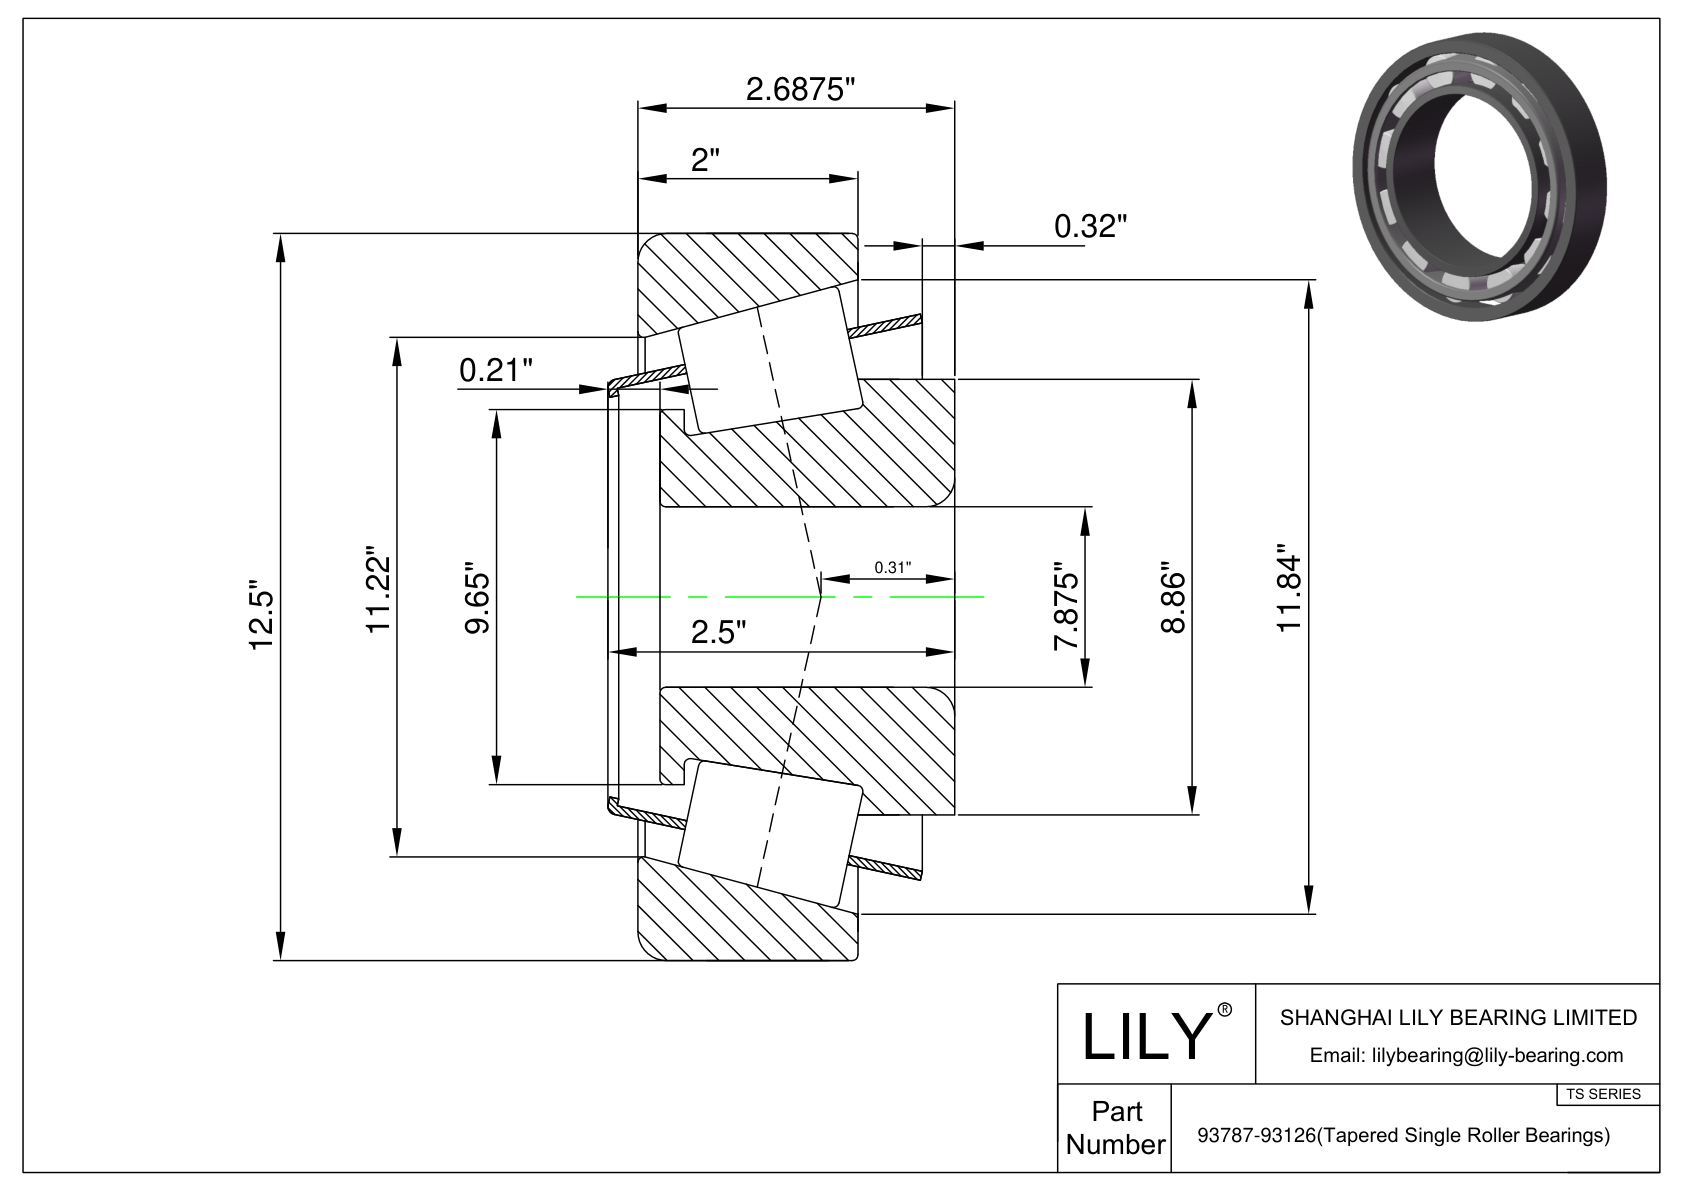 93787-93126 TS (Tapered Single Roller Bearings) (Imperial) cad drawing